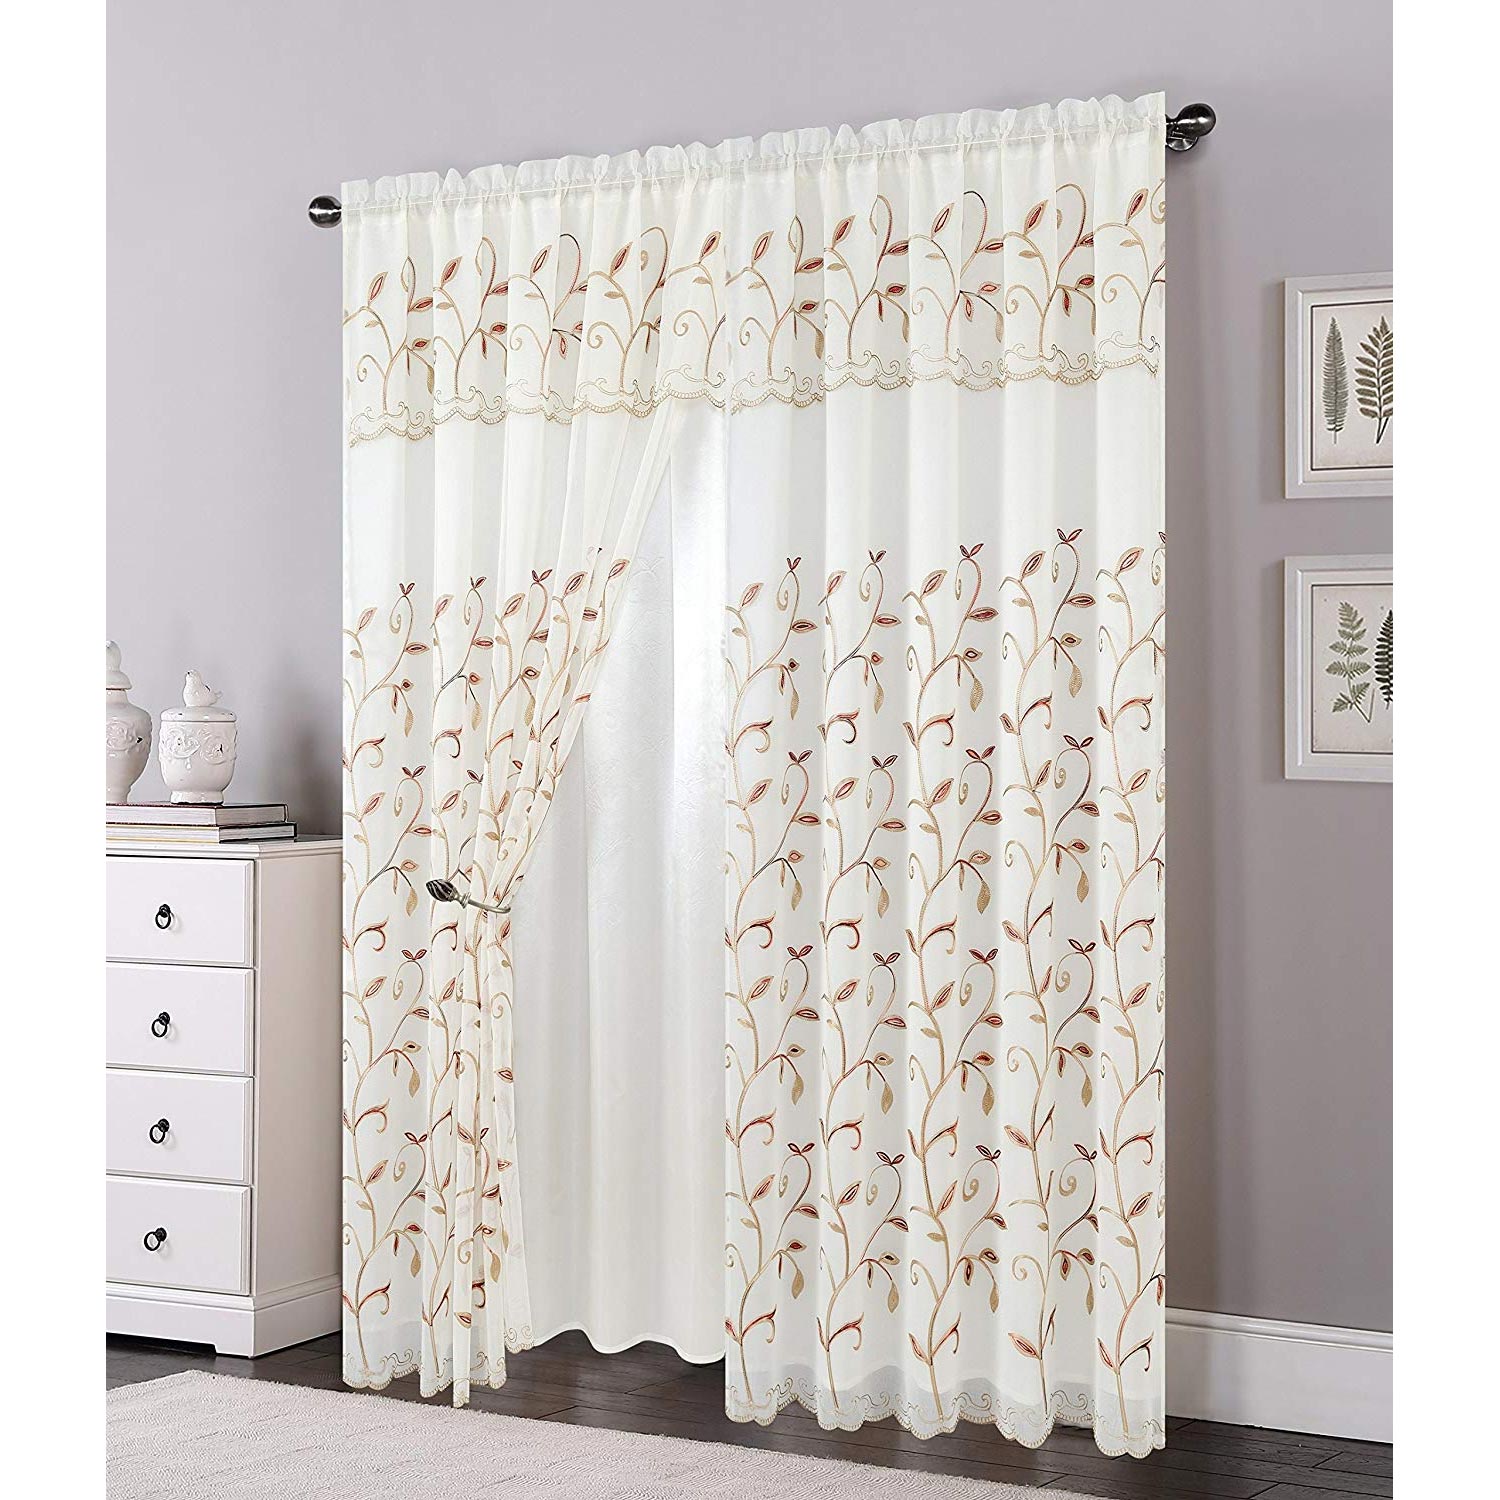 Luxury Curtain/Window Panel Set with Attached Valance and Backing 54" X 84 inch